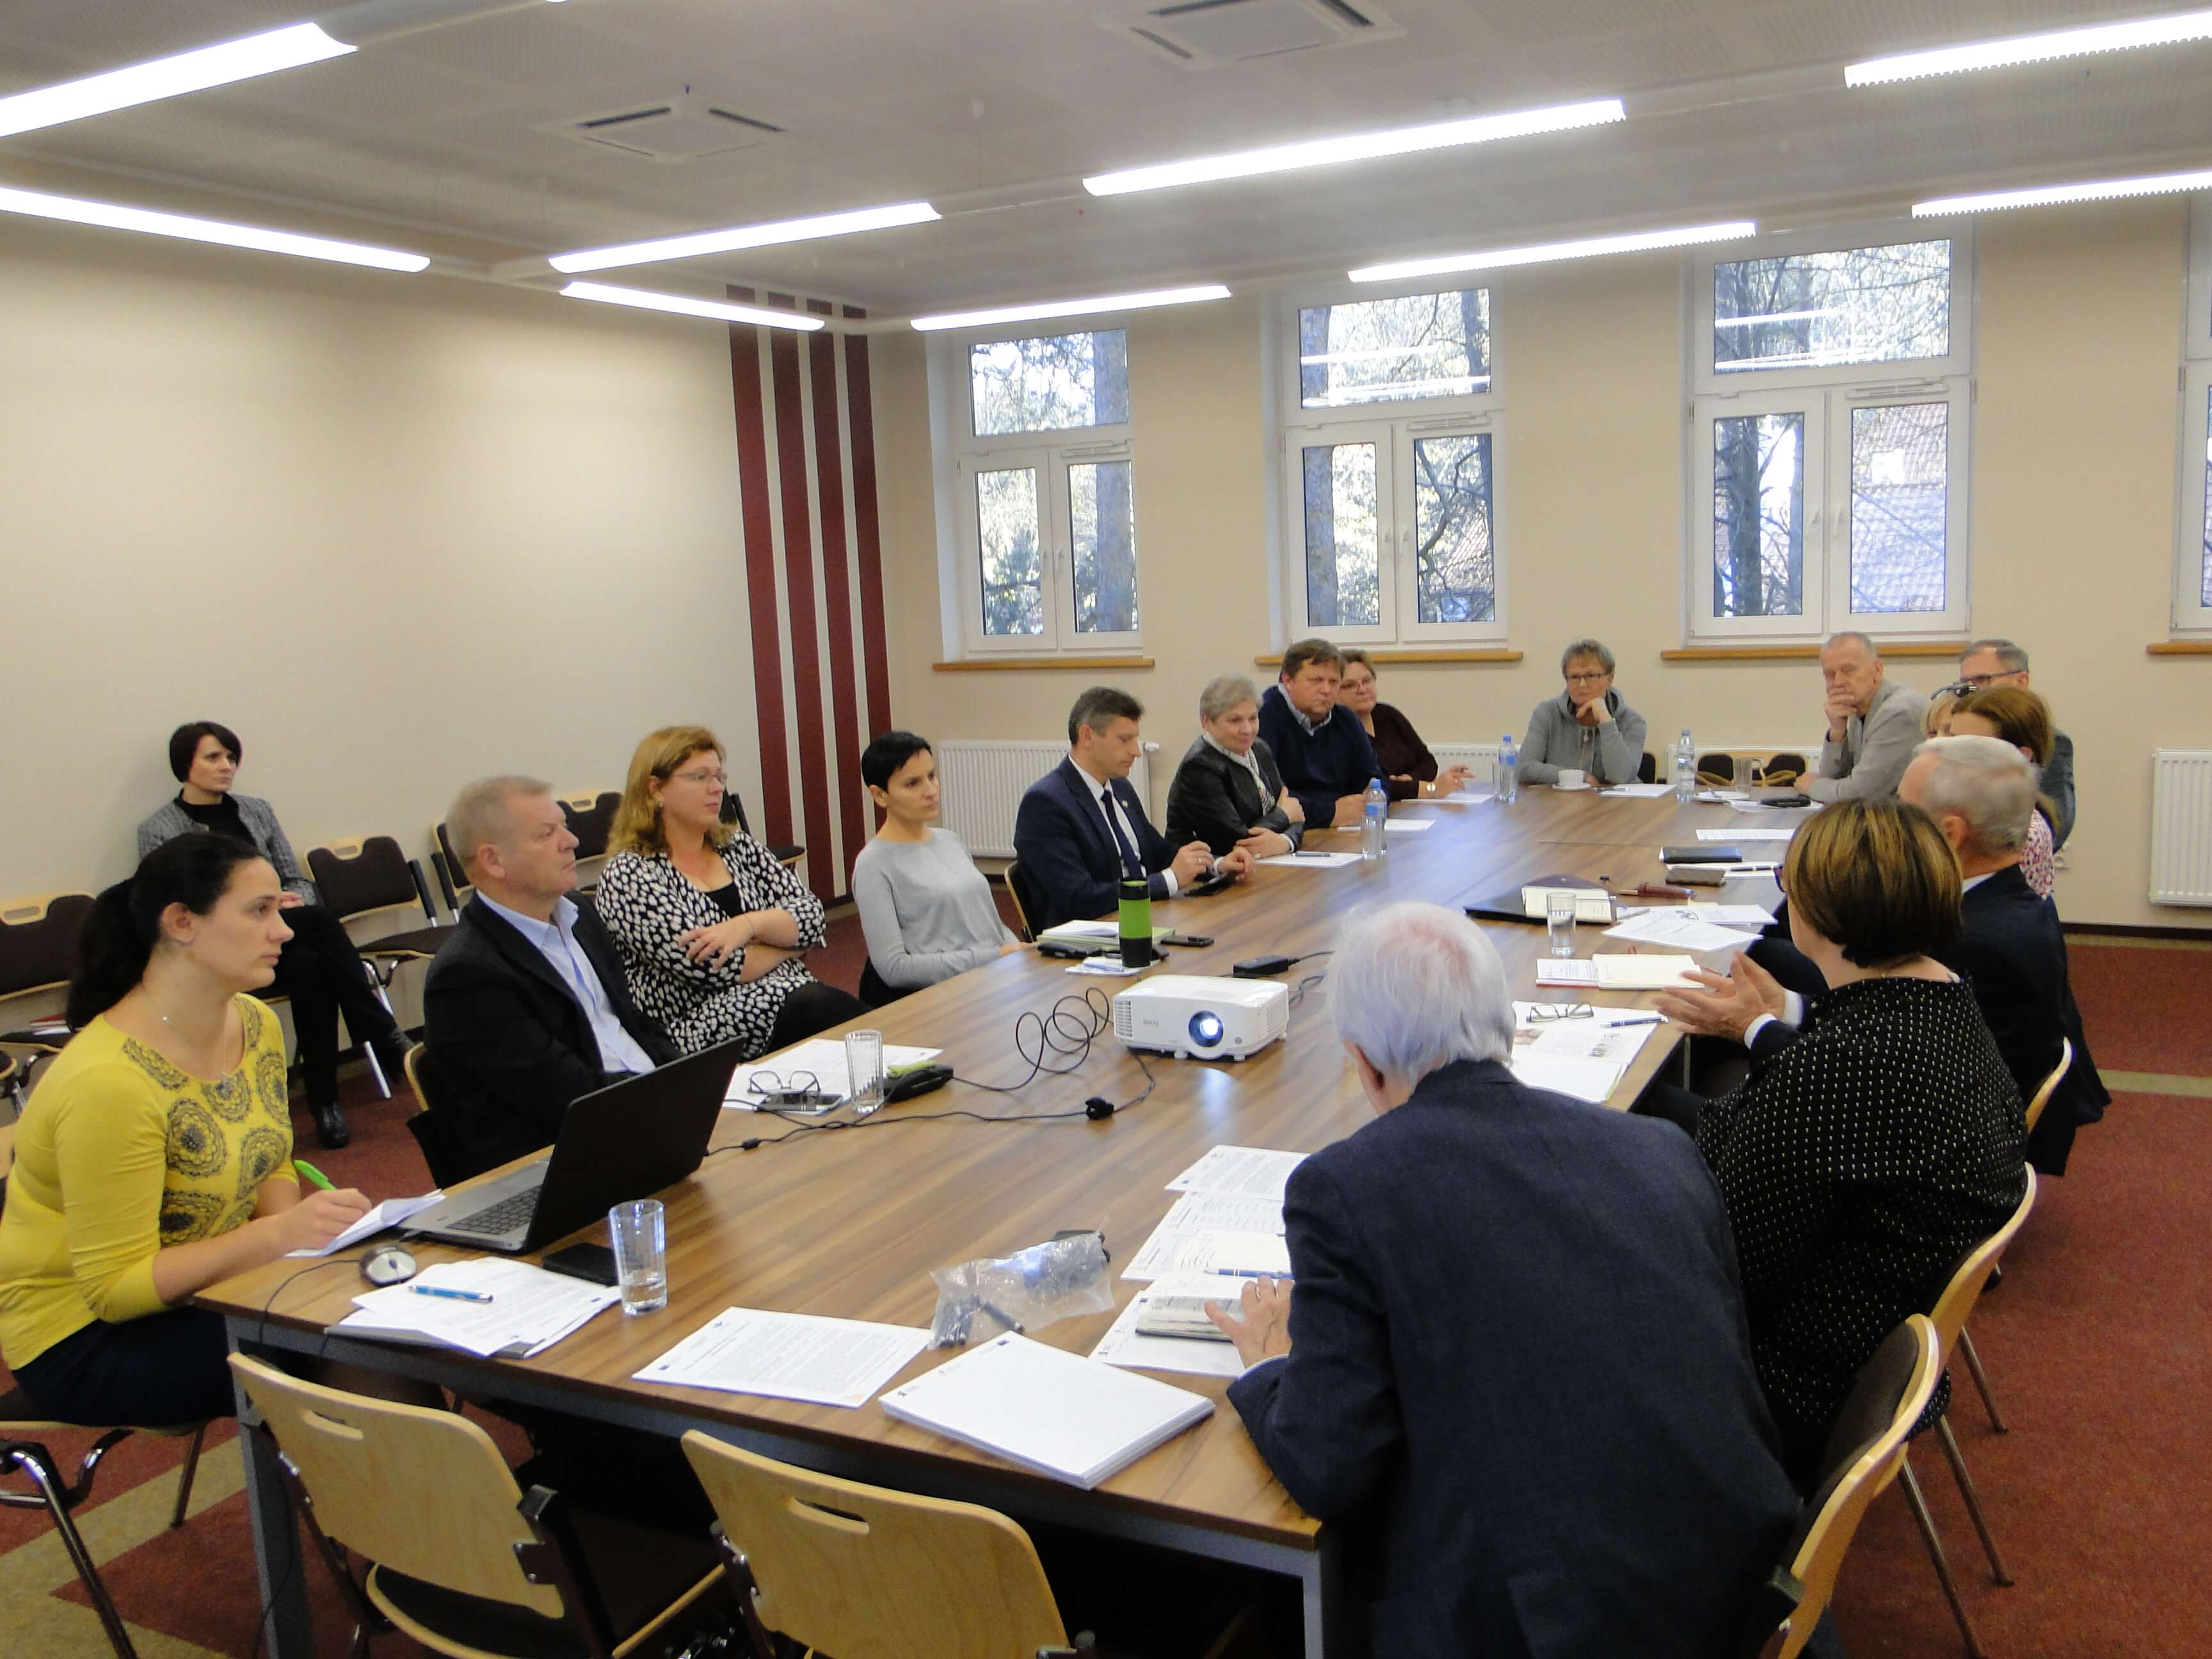 1st stakeholders meeting in Warmia and Mazury region